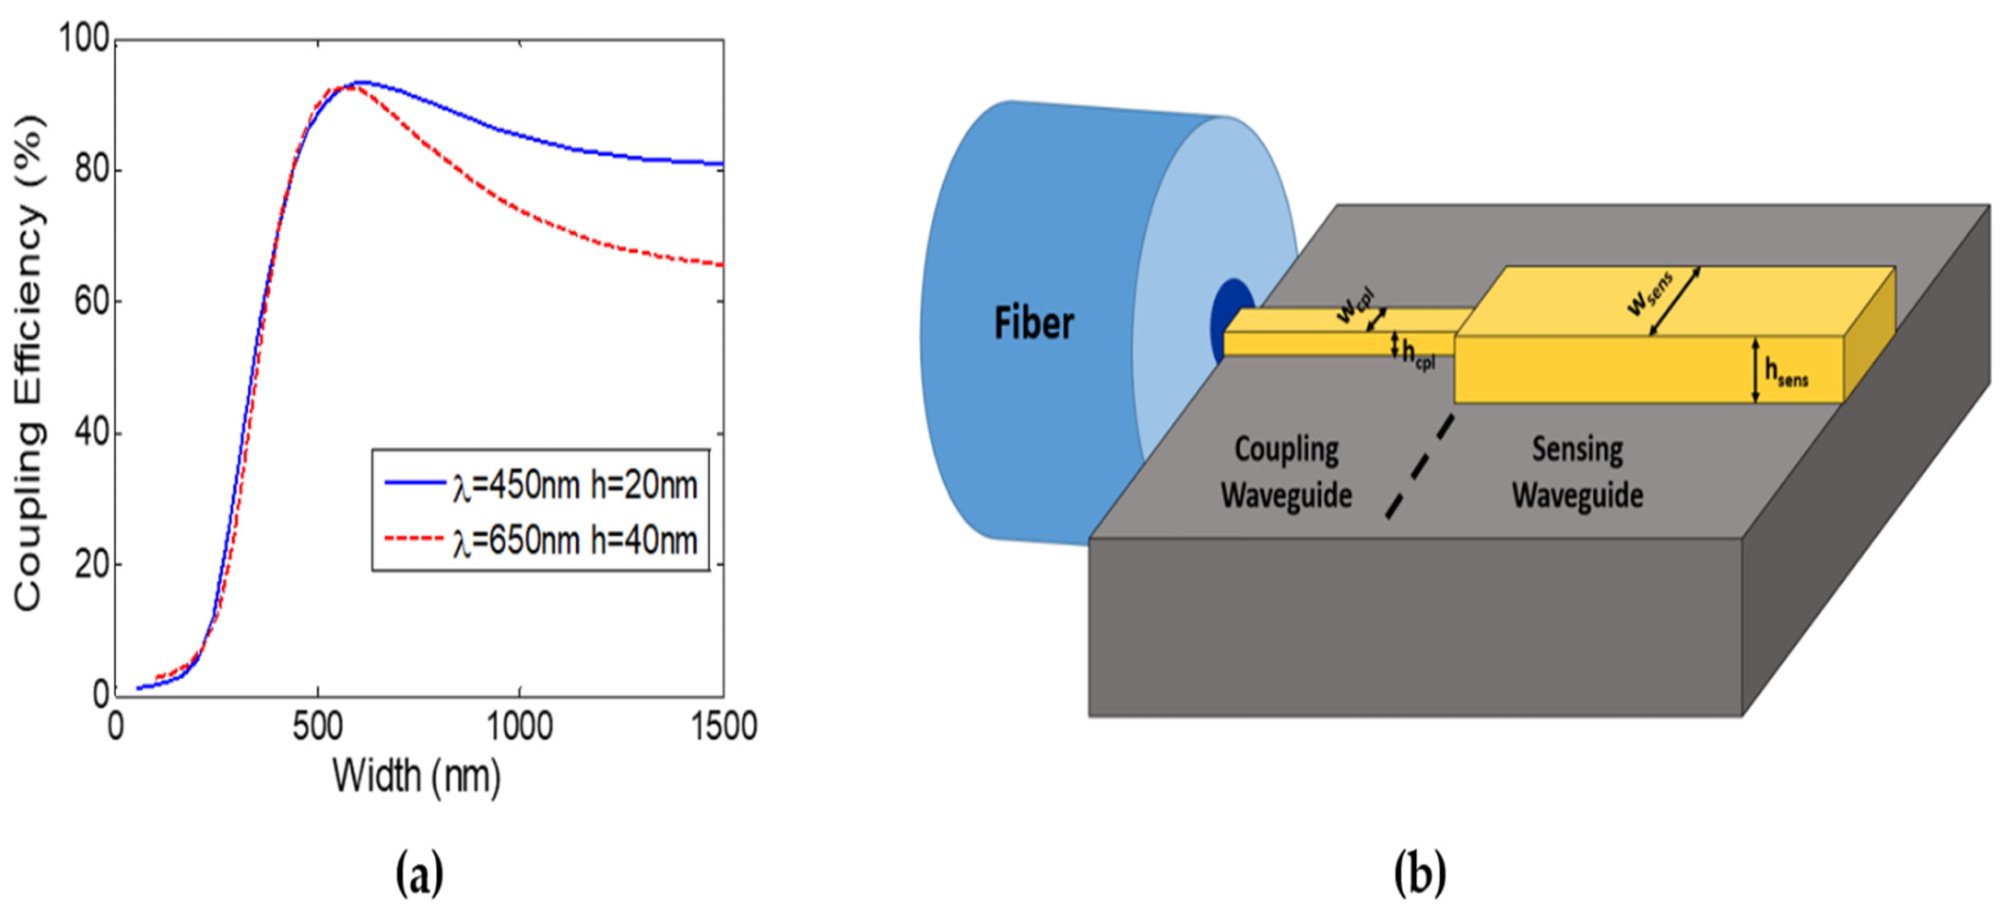 (a) Fiber to strip waveguide coupling efficiency versus waveguide width at ? = 450 nm and ? = 650 nm with h = 20 nm and h = 40 nm, respectively. (b) Schematic of two-step fiber edge coupling.